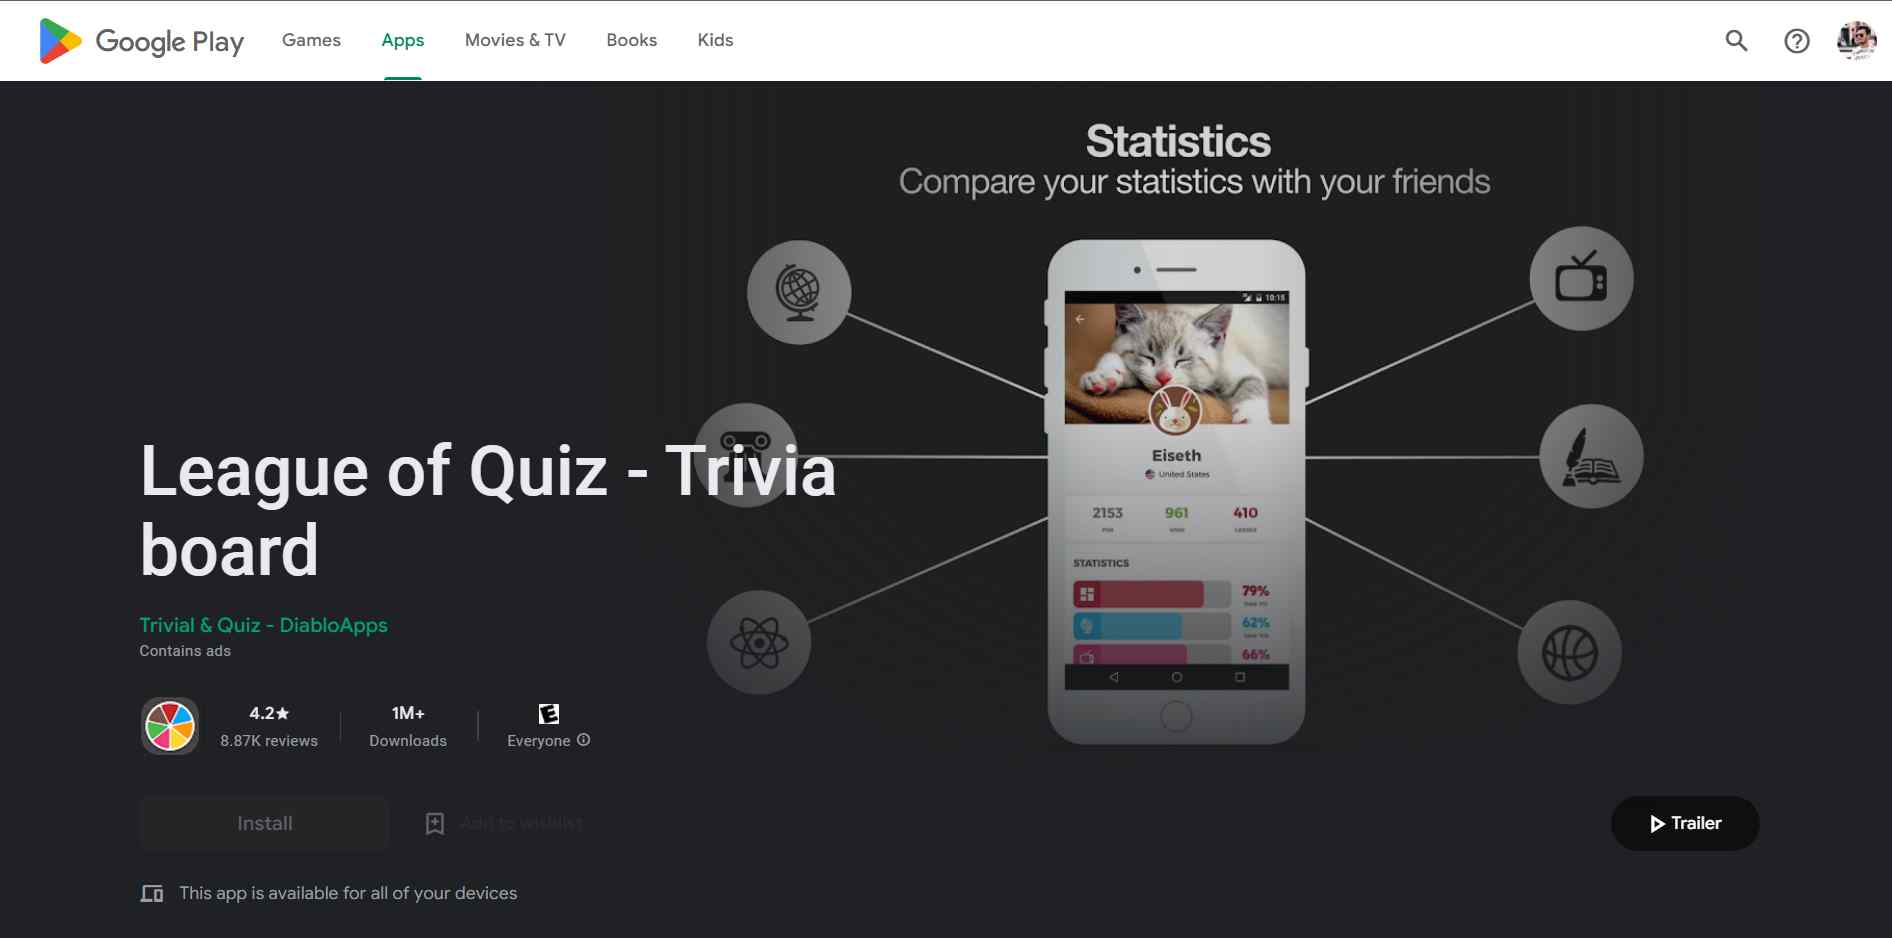 The League of Quizs is an online community of people who like quizzes and get together to take the most extensive online quizzes in the world.